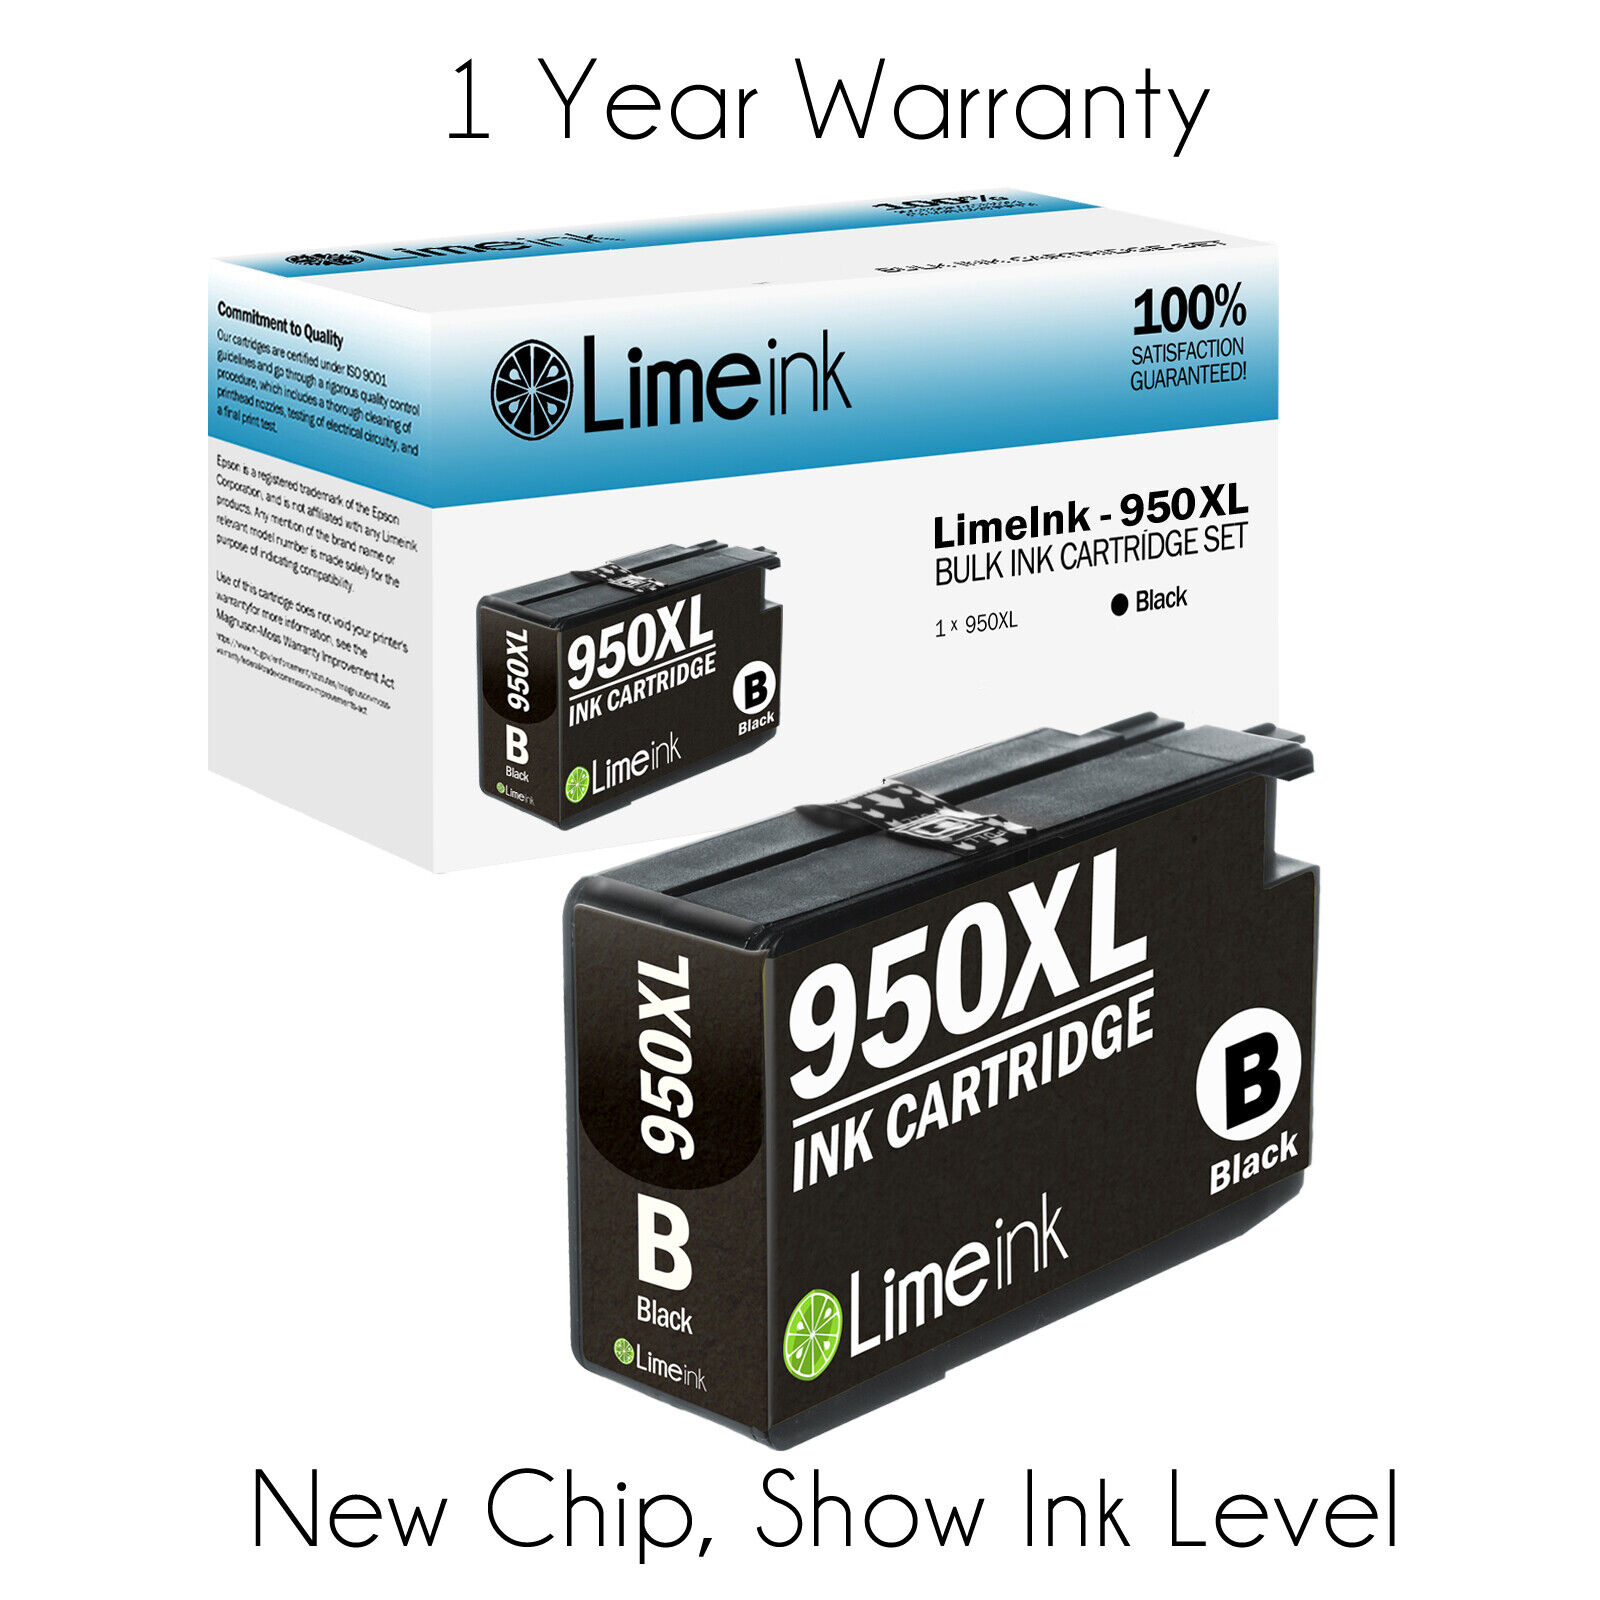 Ink Cartridges for HP 950XL 951XL for HP officejet pro 8600 8610 8620 8100 8625